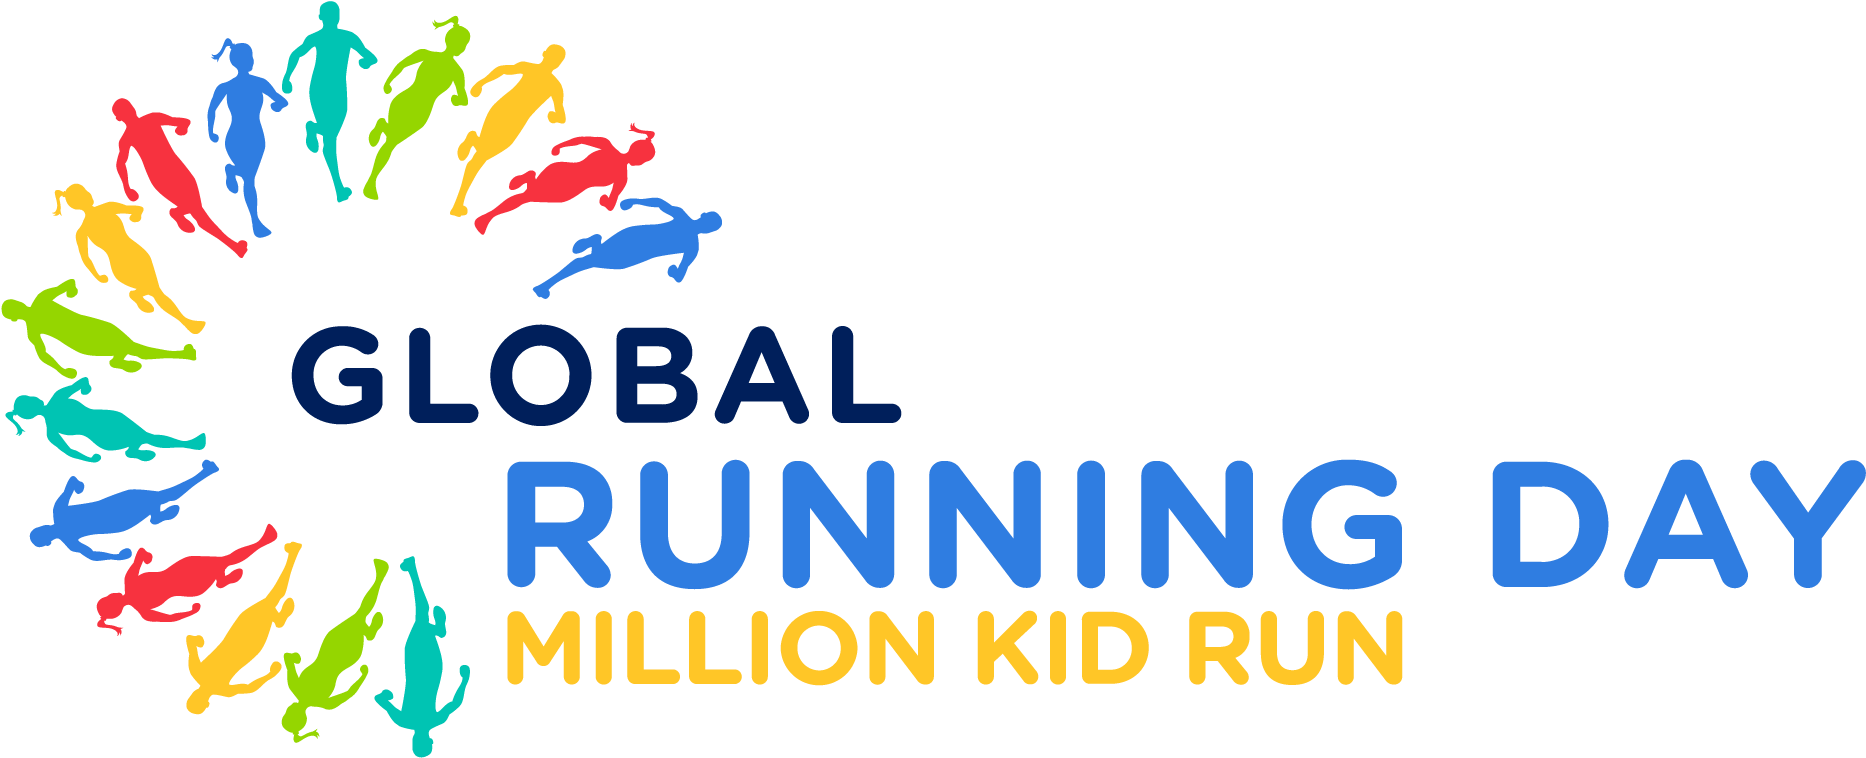 Crowdrise - Global Running Day 2018 (1913x821), Png Download